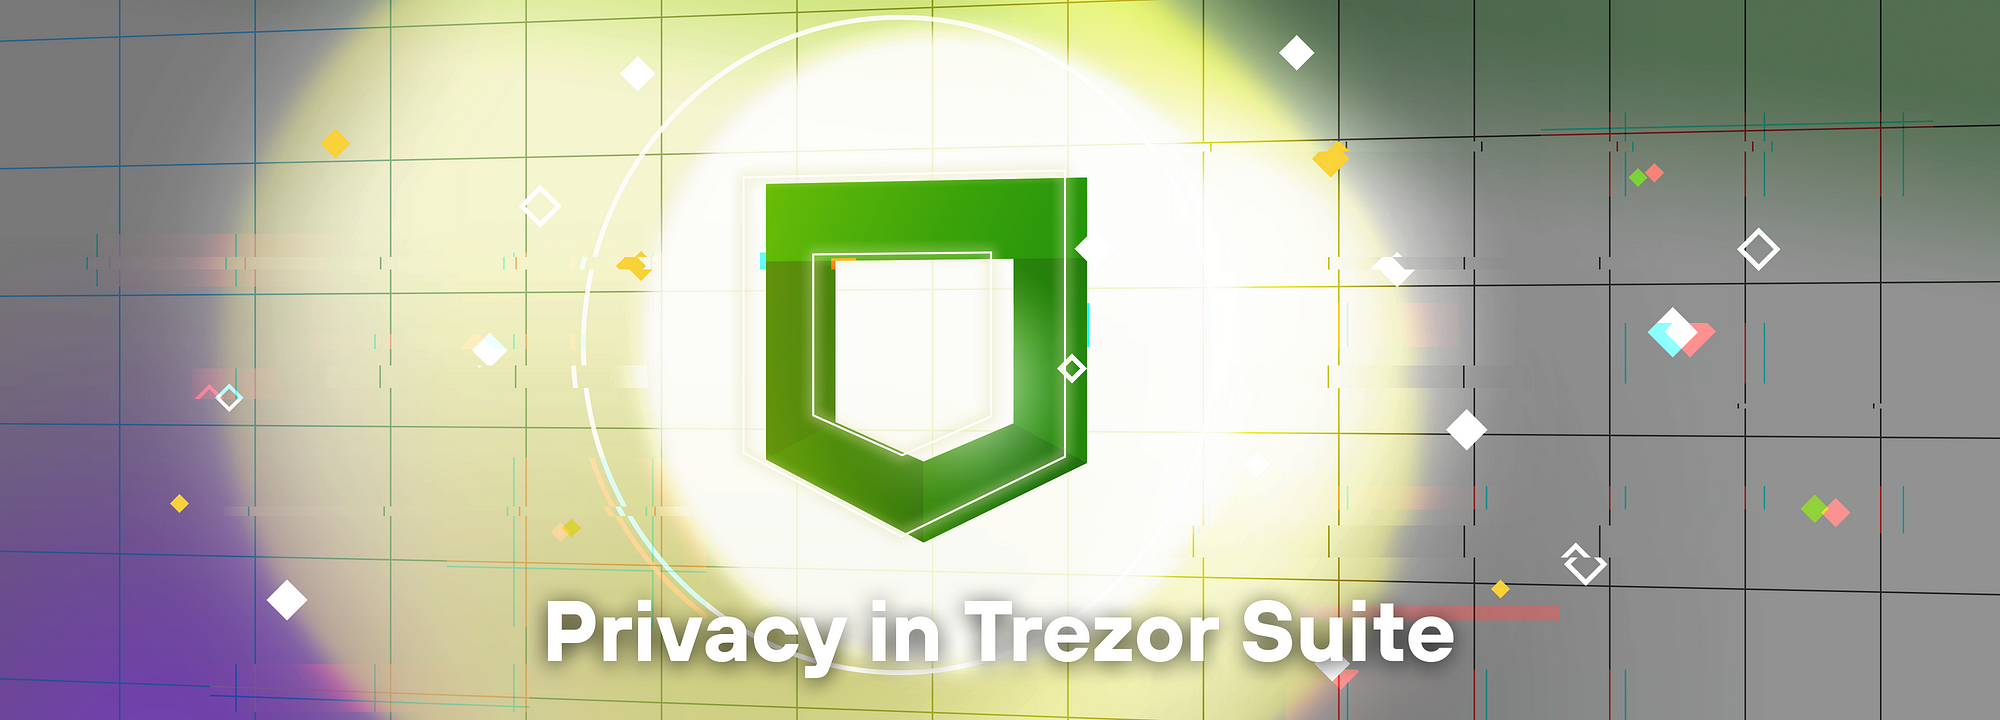 Trezor Suite: Privacy made easy. Trezor Suite is a privacy-focused… | by  SatoshiLabs | Trezor Blog